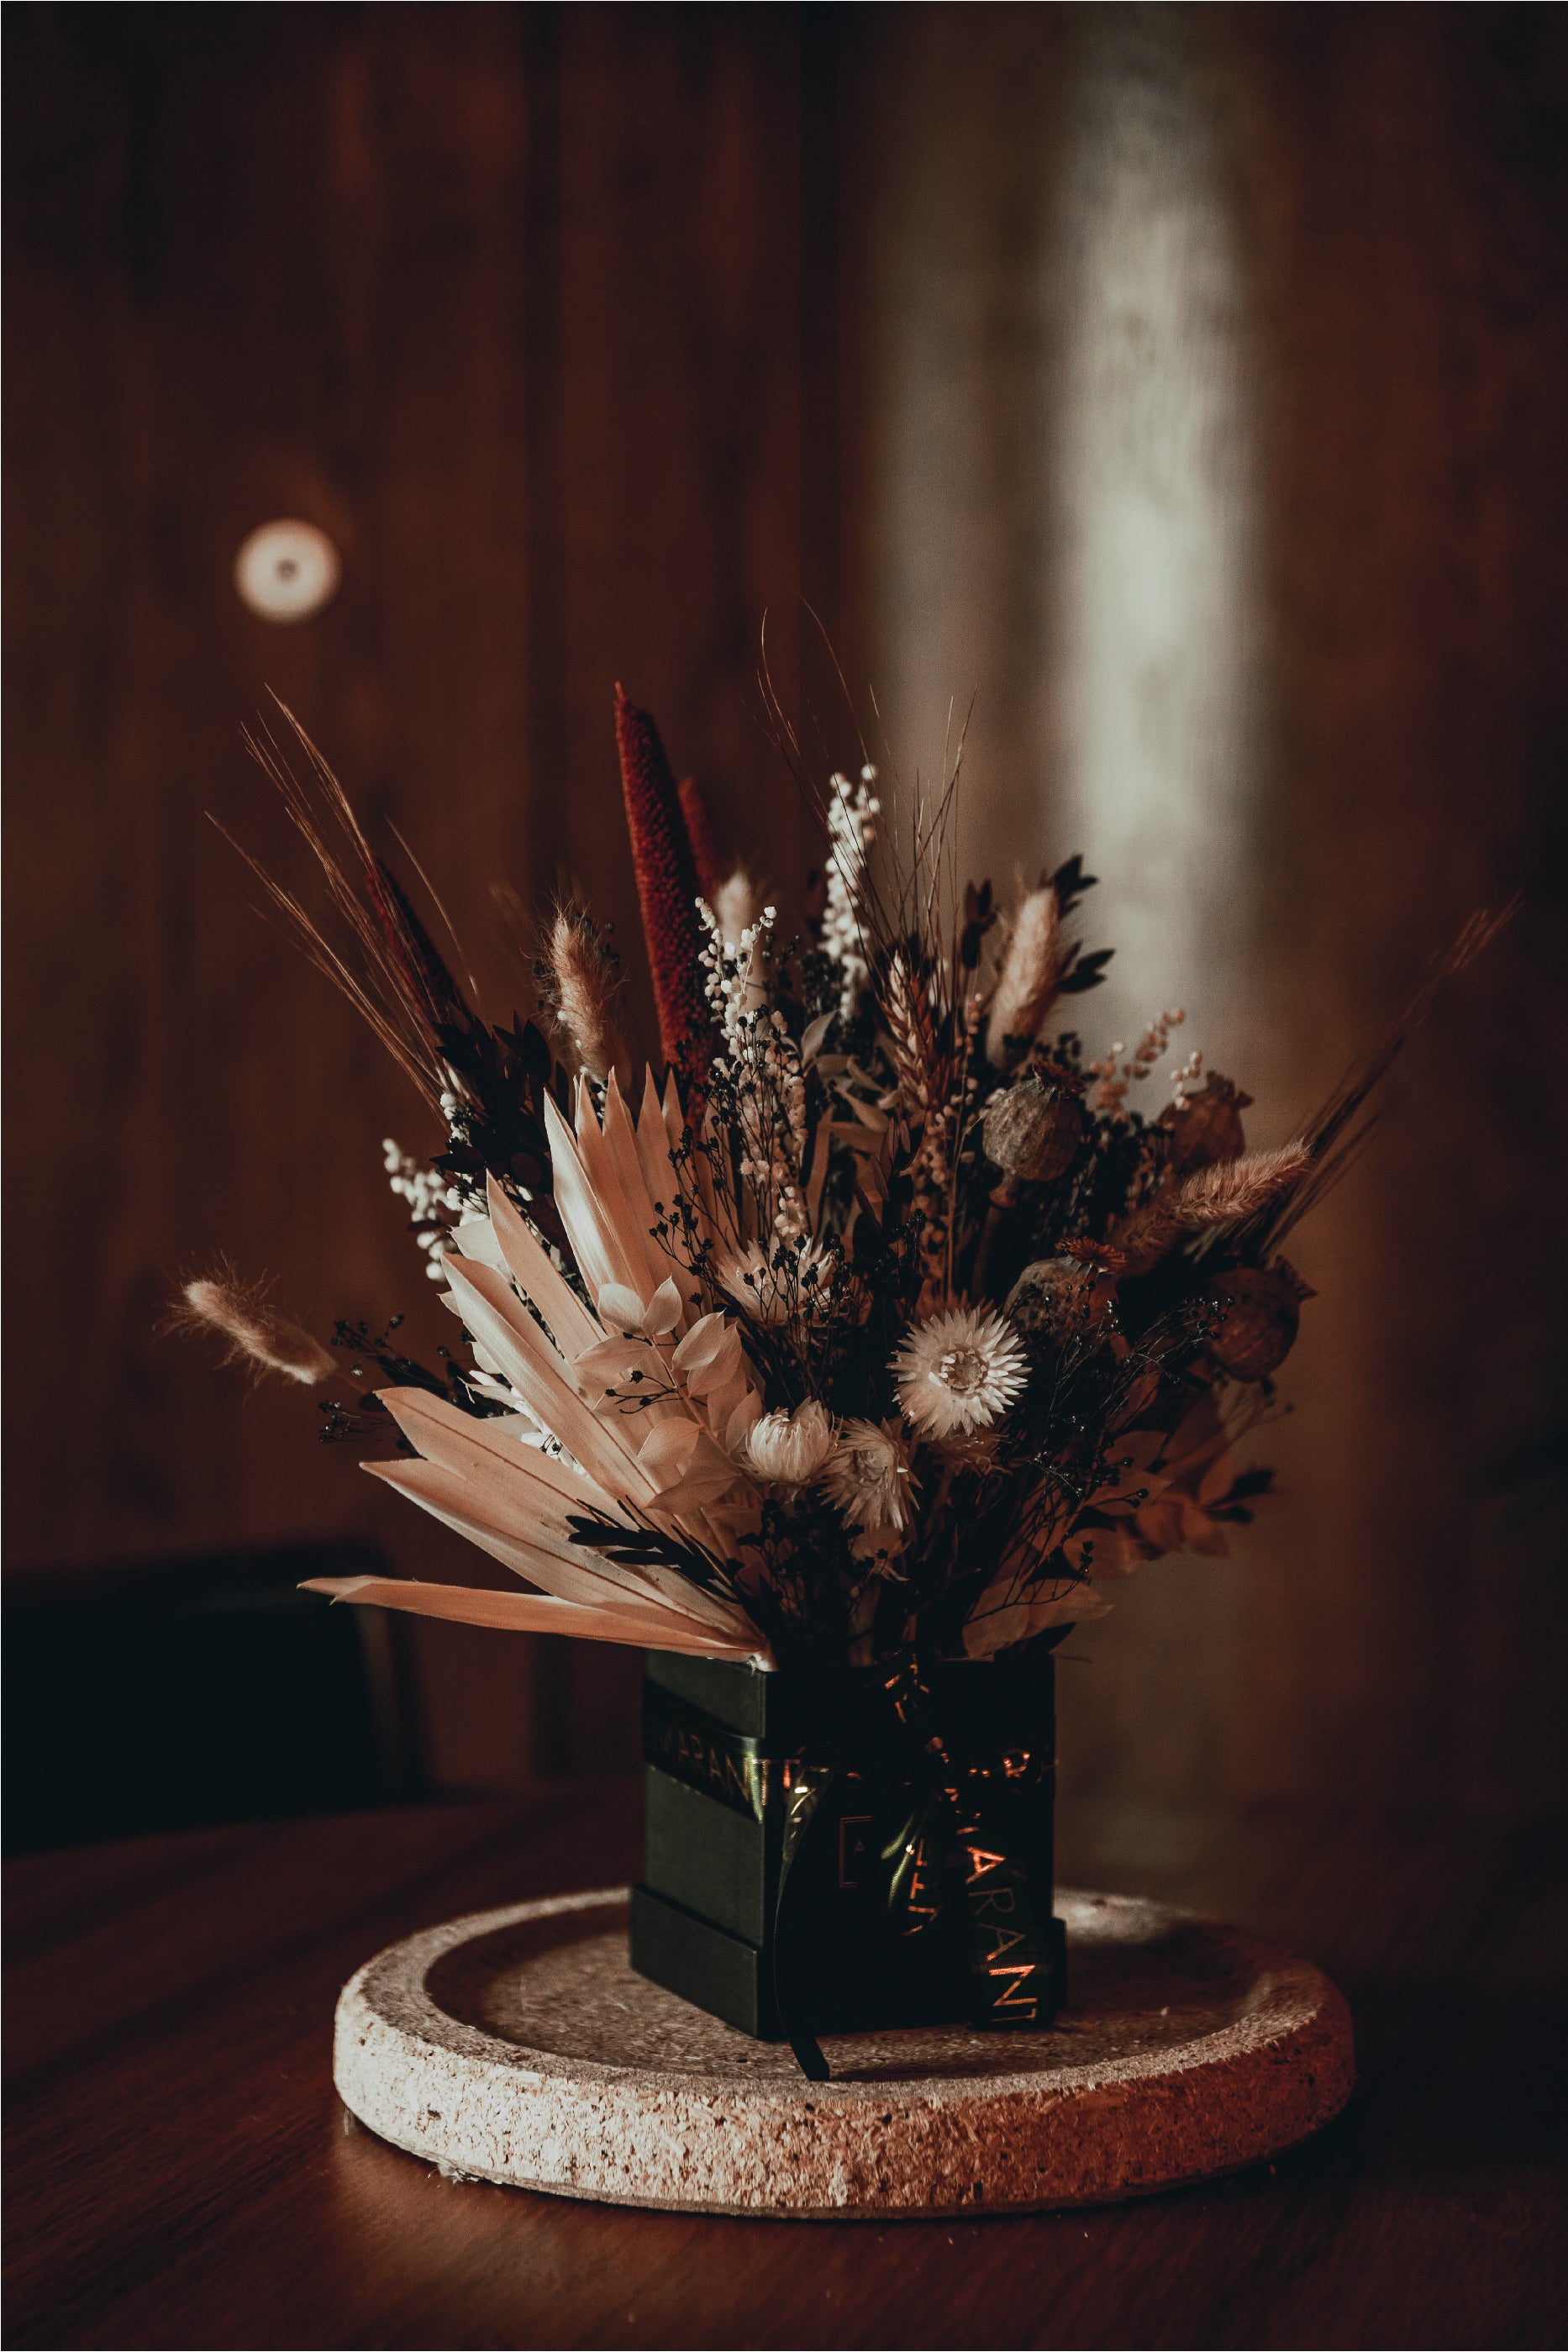 This image captures the intricate detail of this bespoke floral arrangement designed and produced by Amaranté London, a lush composition with striking red spikes, soft white flowers, and textural foliage, all contained in a dark, elegant box vase resting on a cork display in the warm, wood-toned ambience of a London event venue.